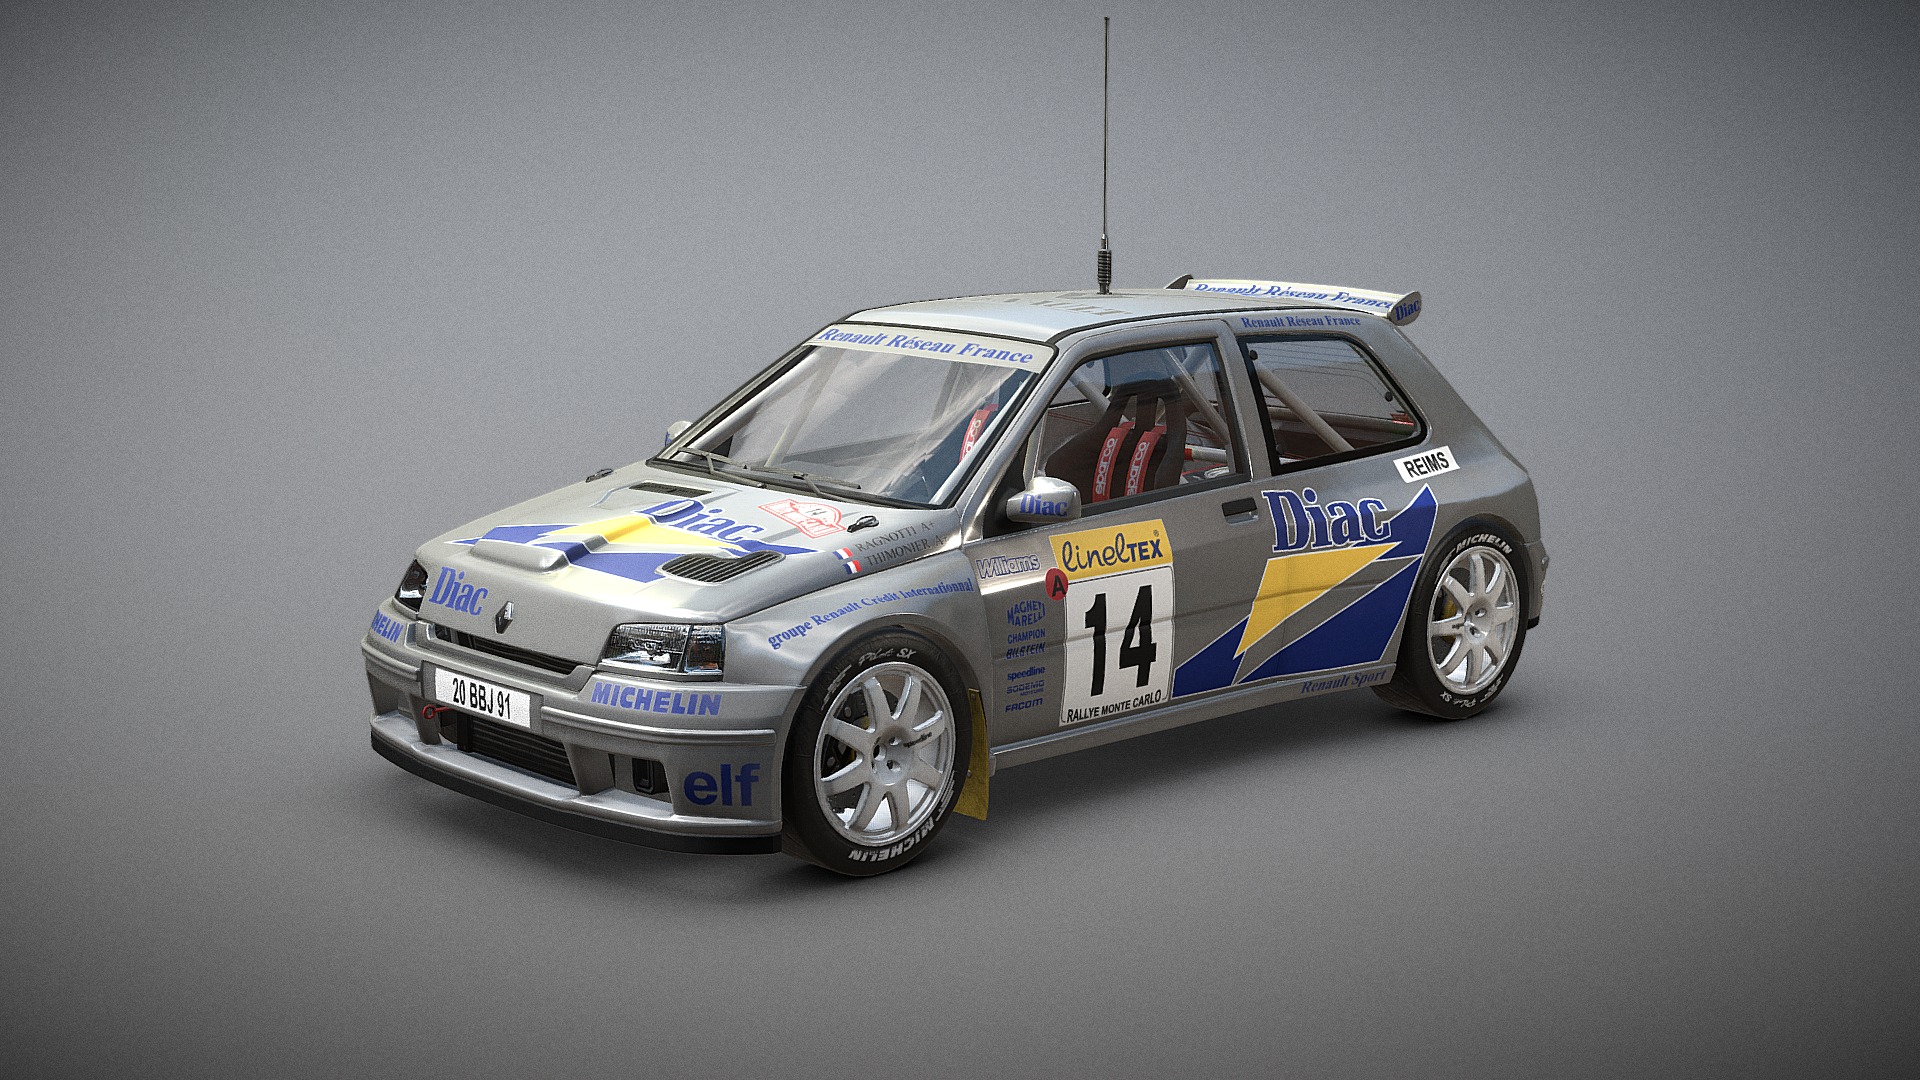 3D model Renault Maxi Clio - This is a 3D model of the Renault Maxi Clio. The 3D model is about a car with a number on it.